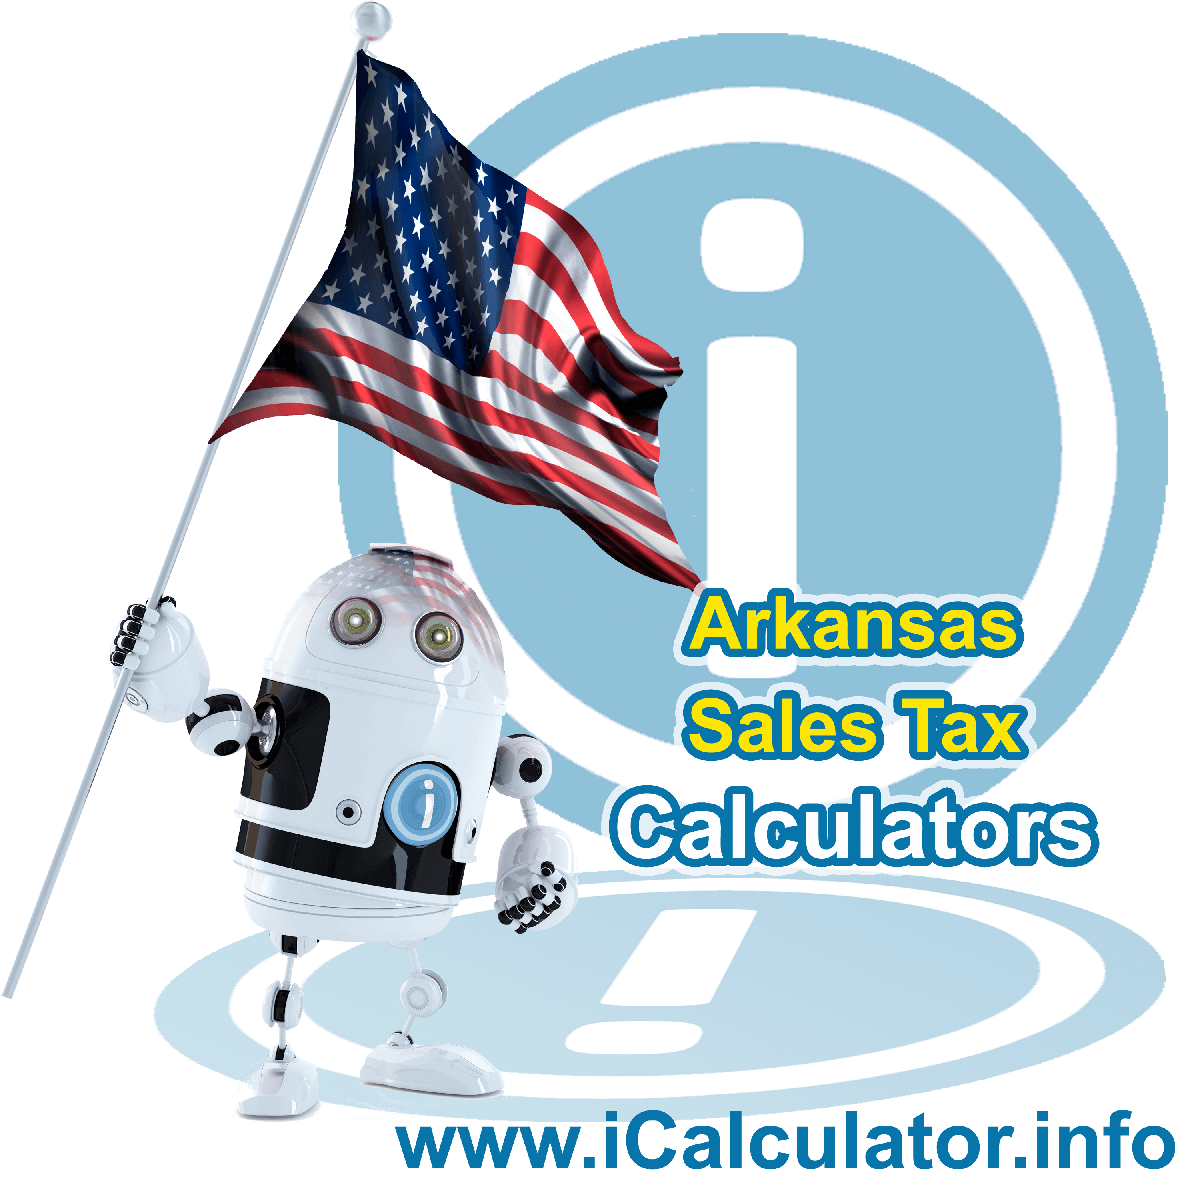 Arkadelphia Sales Rates: This image illustrates a calculator robot calculating Arkadelphia sales tax manually using the Arkadelphia Sales Tax Formula. You can use this information to calculate Arkadelphia Sales Tax manually or use the Arkadelphia Sales Tax Calculator to calculate sales tax online.